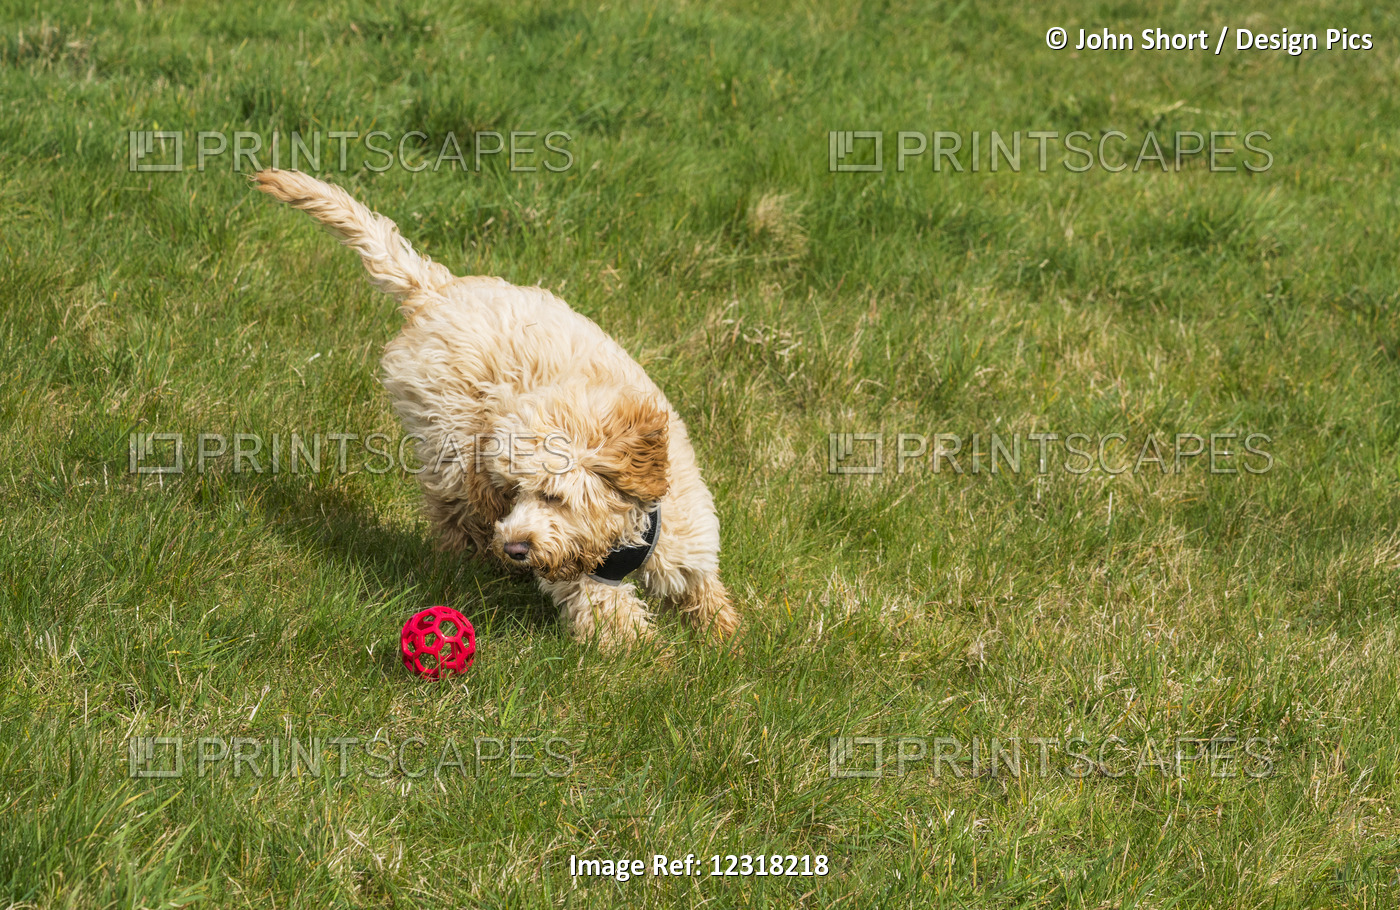 A Cockapoo Plays With A Red Ball On Grass; South Shields, Tyne And Wear, England